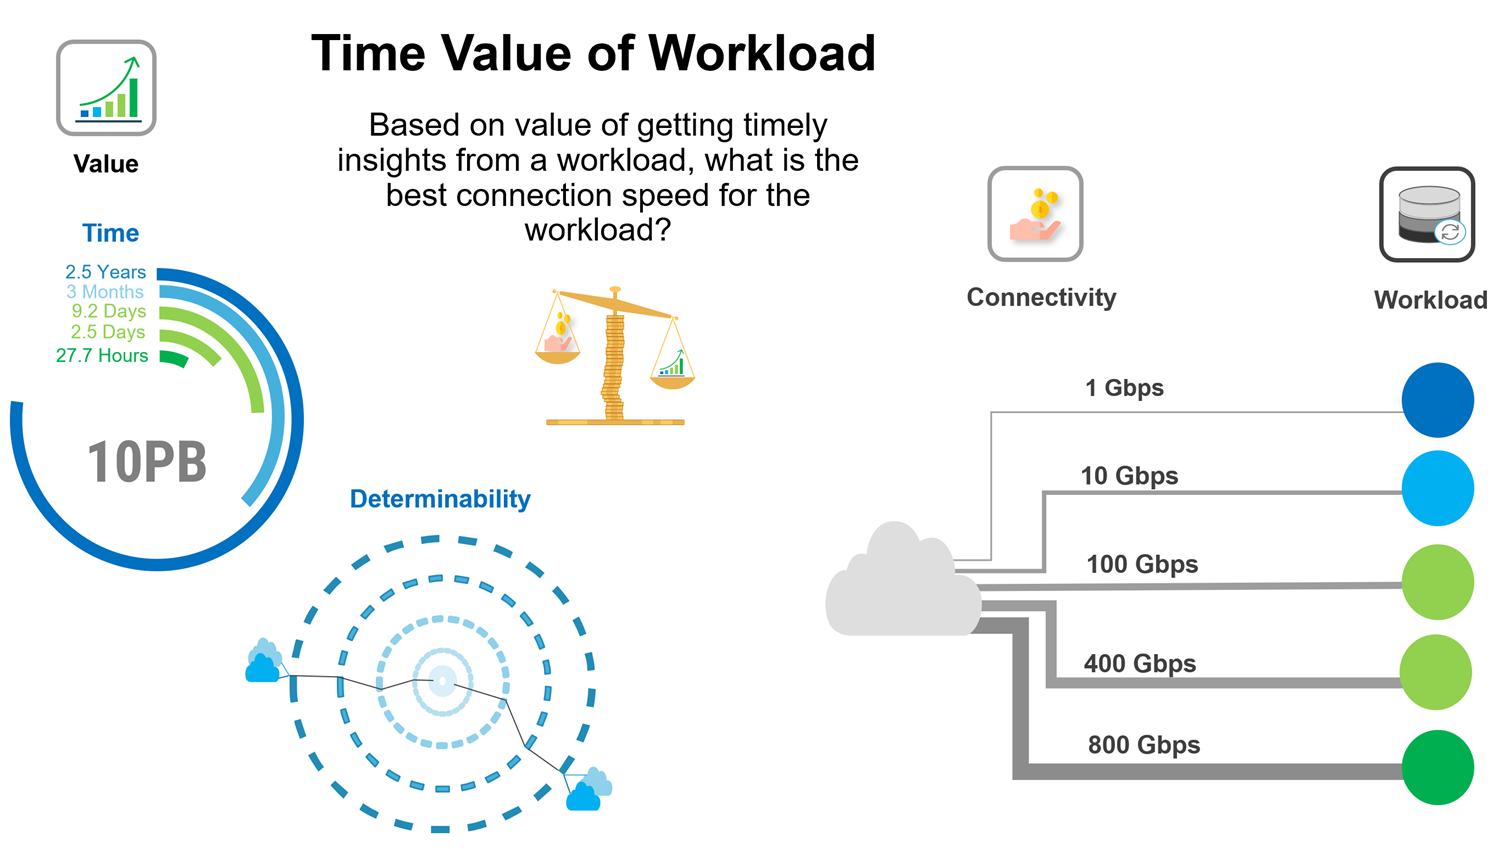 Diagram: The time value of a workload